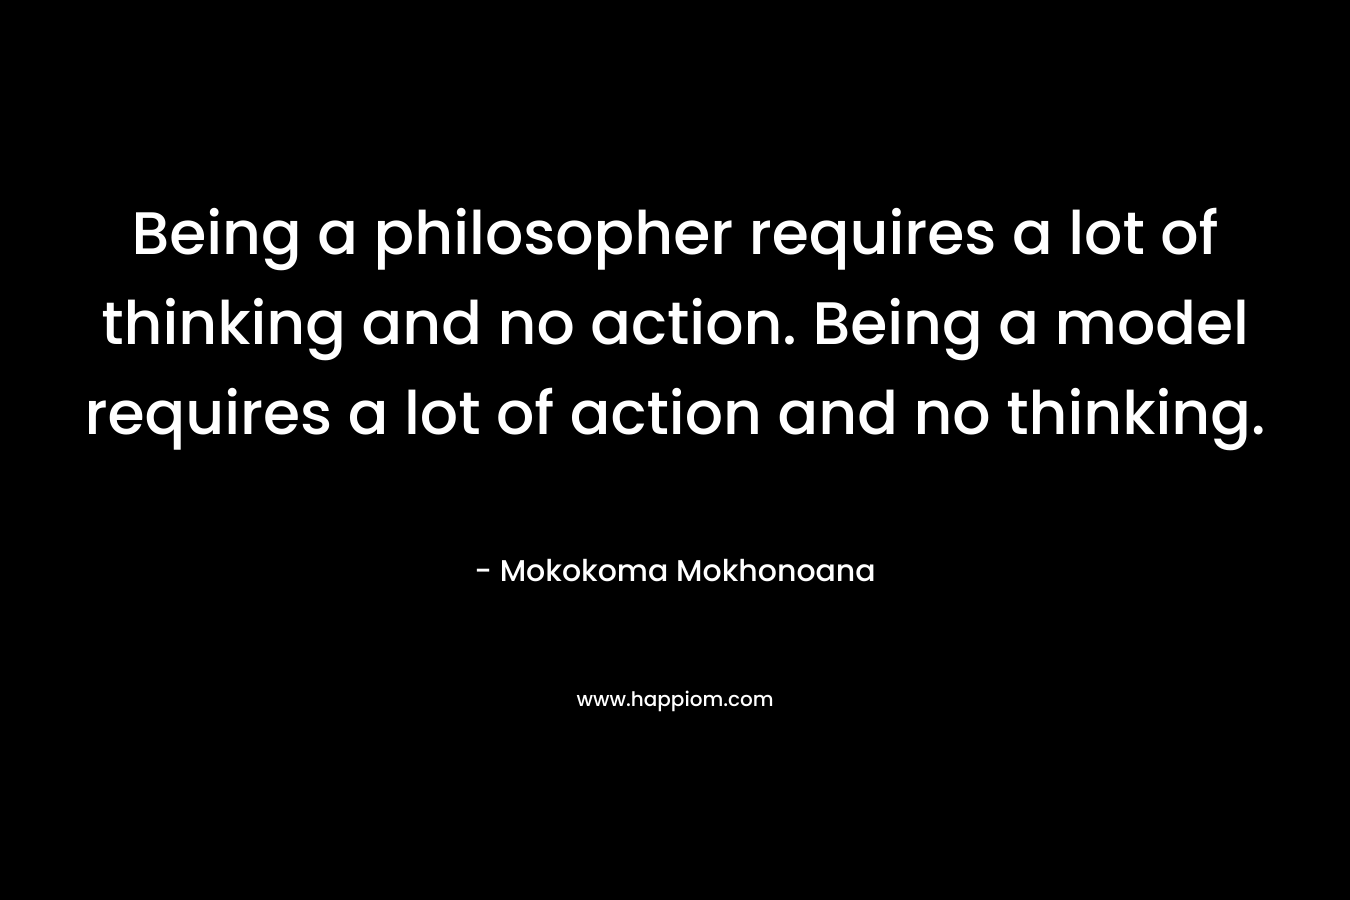 Being a philosopher requires a lot of thinking and no action. Being a model requires a lot of action and no thinking. – Mokokoma Mokhonoana